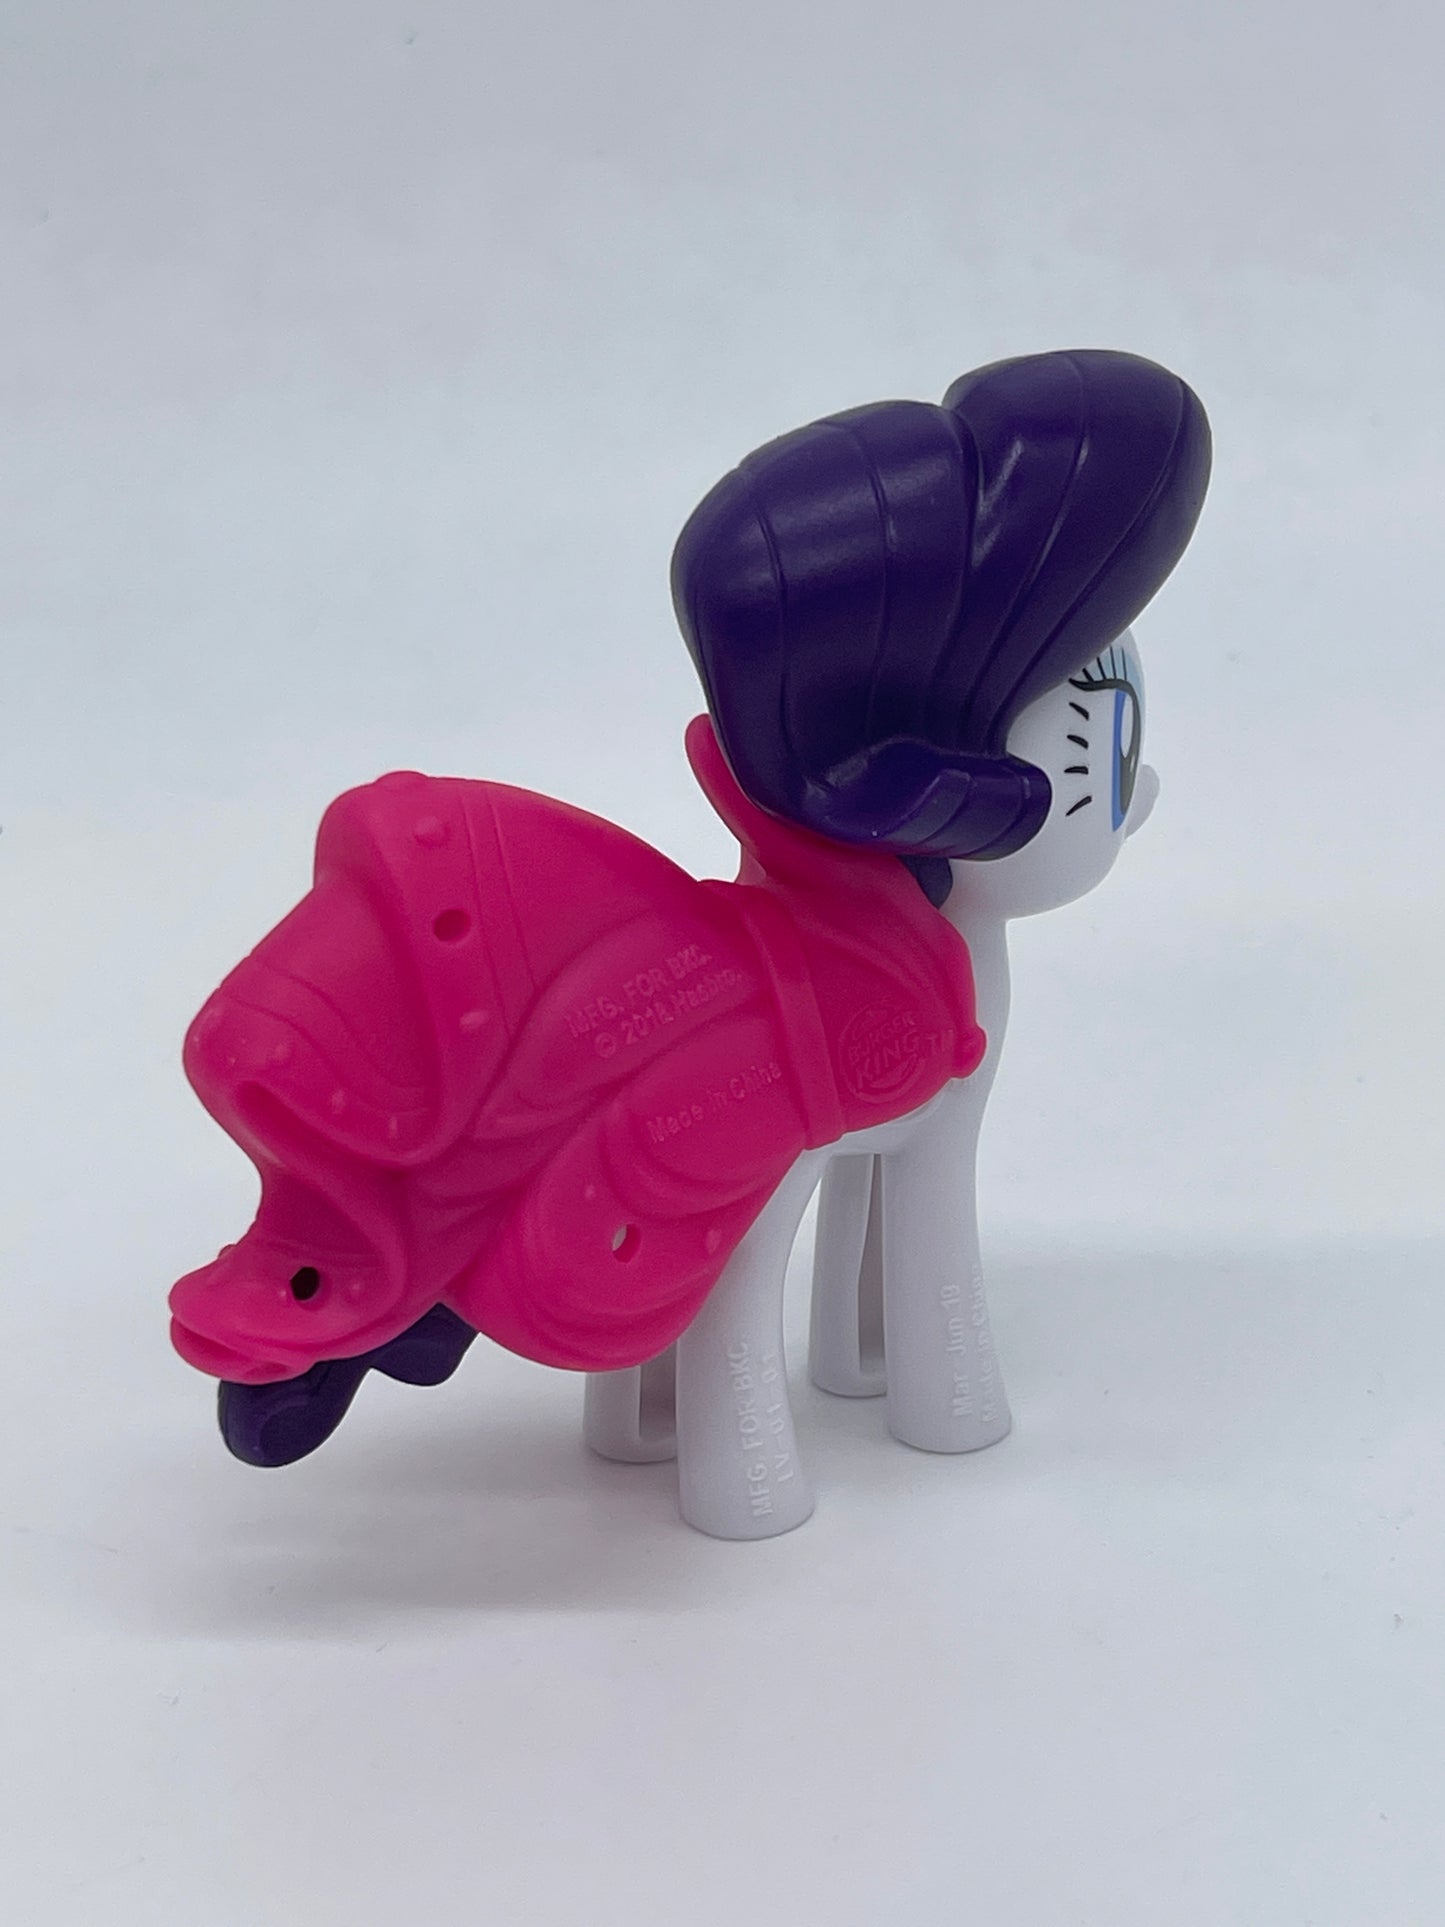 Burger King "Rarity with Removable Throw" My Little Pony Jr. Meal (2019)